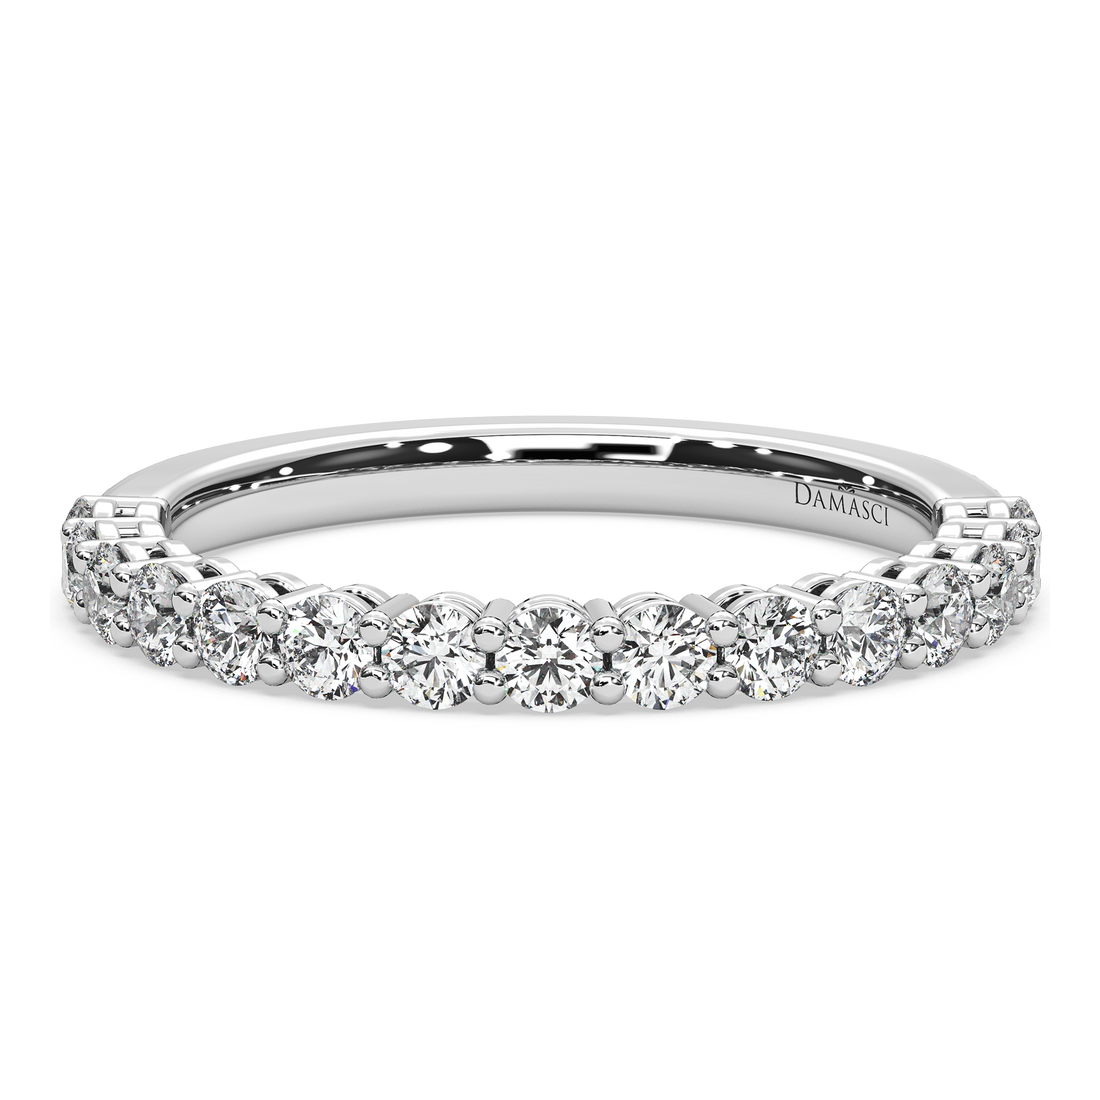 Rounds in Shared Claw Wedding Ring